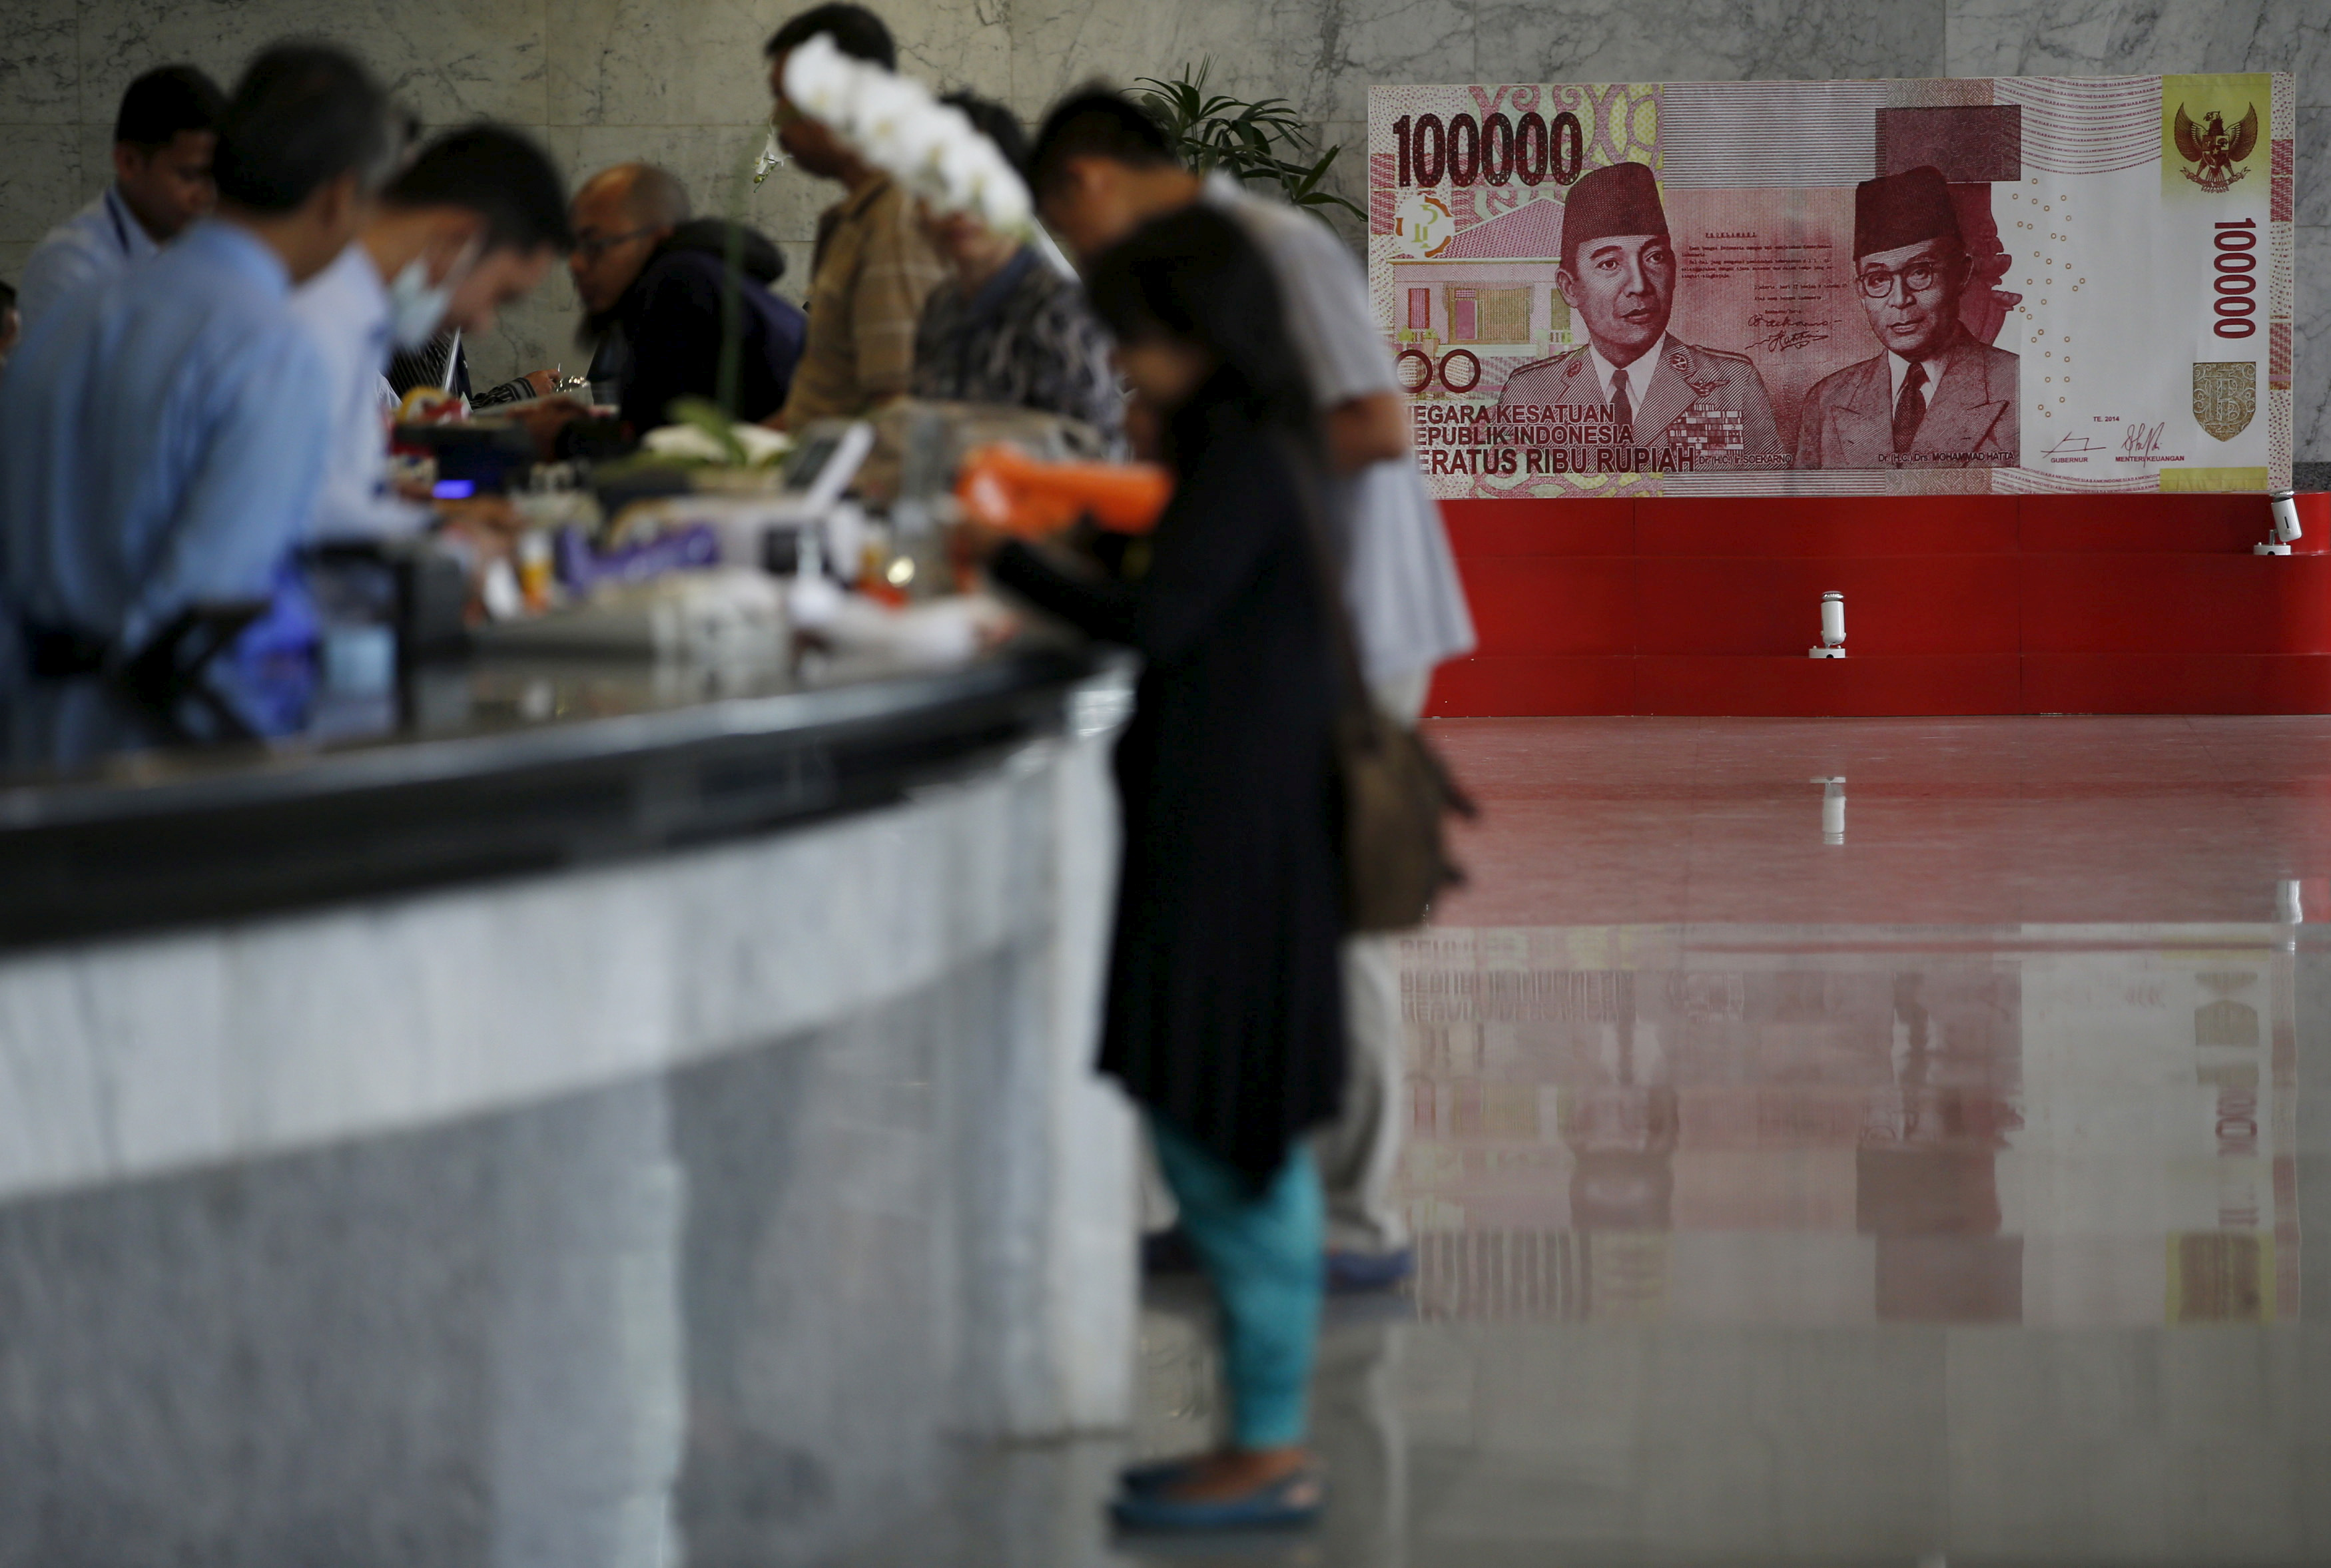 Customers are seen at a counter inside the Bank Indonesia complex in Jakarta